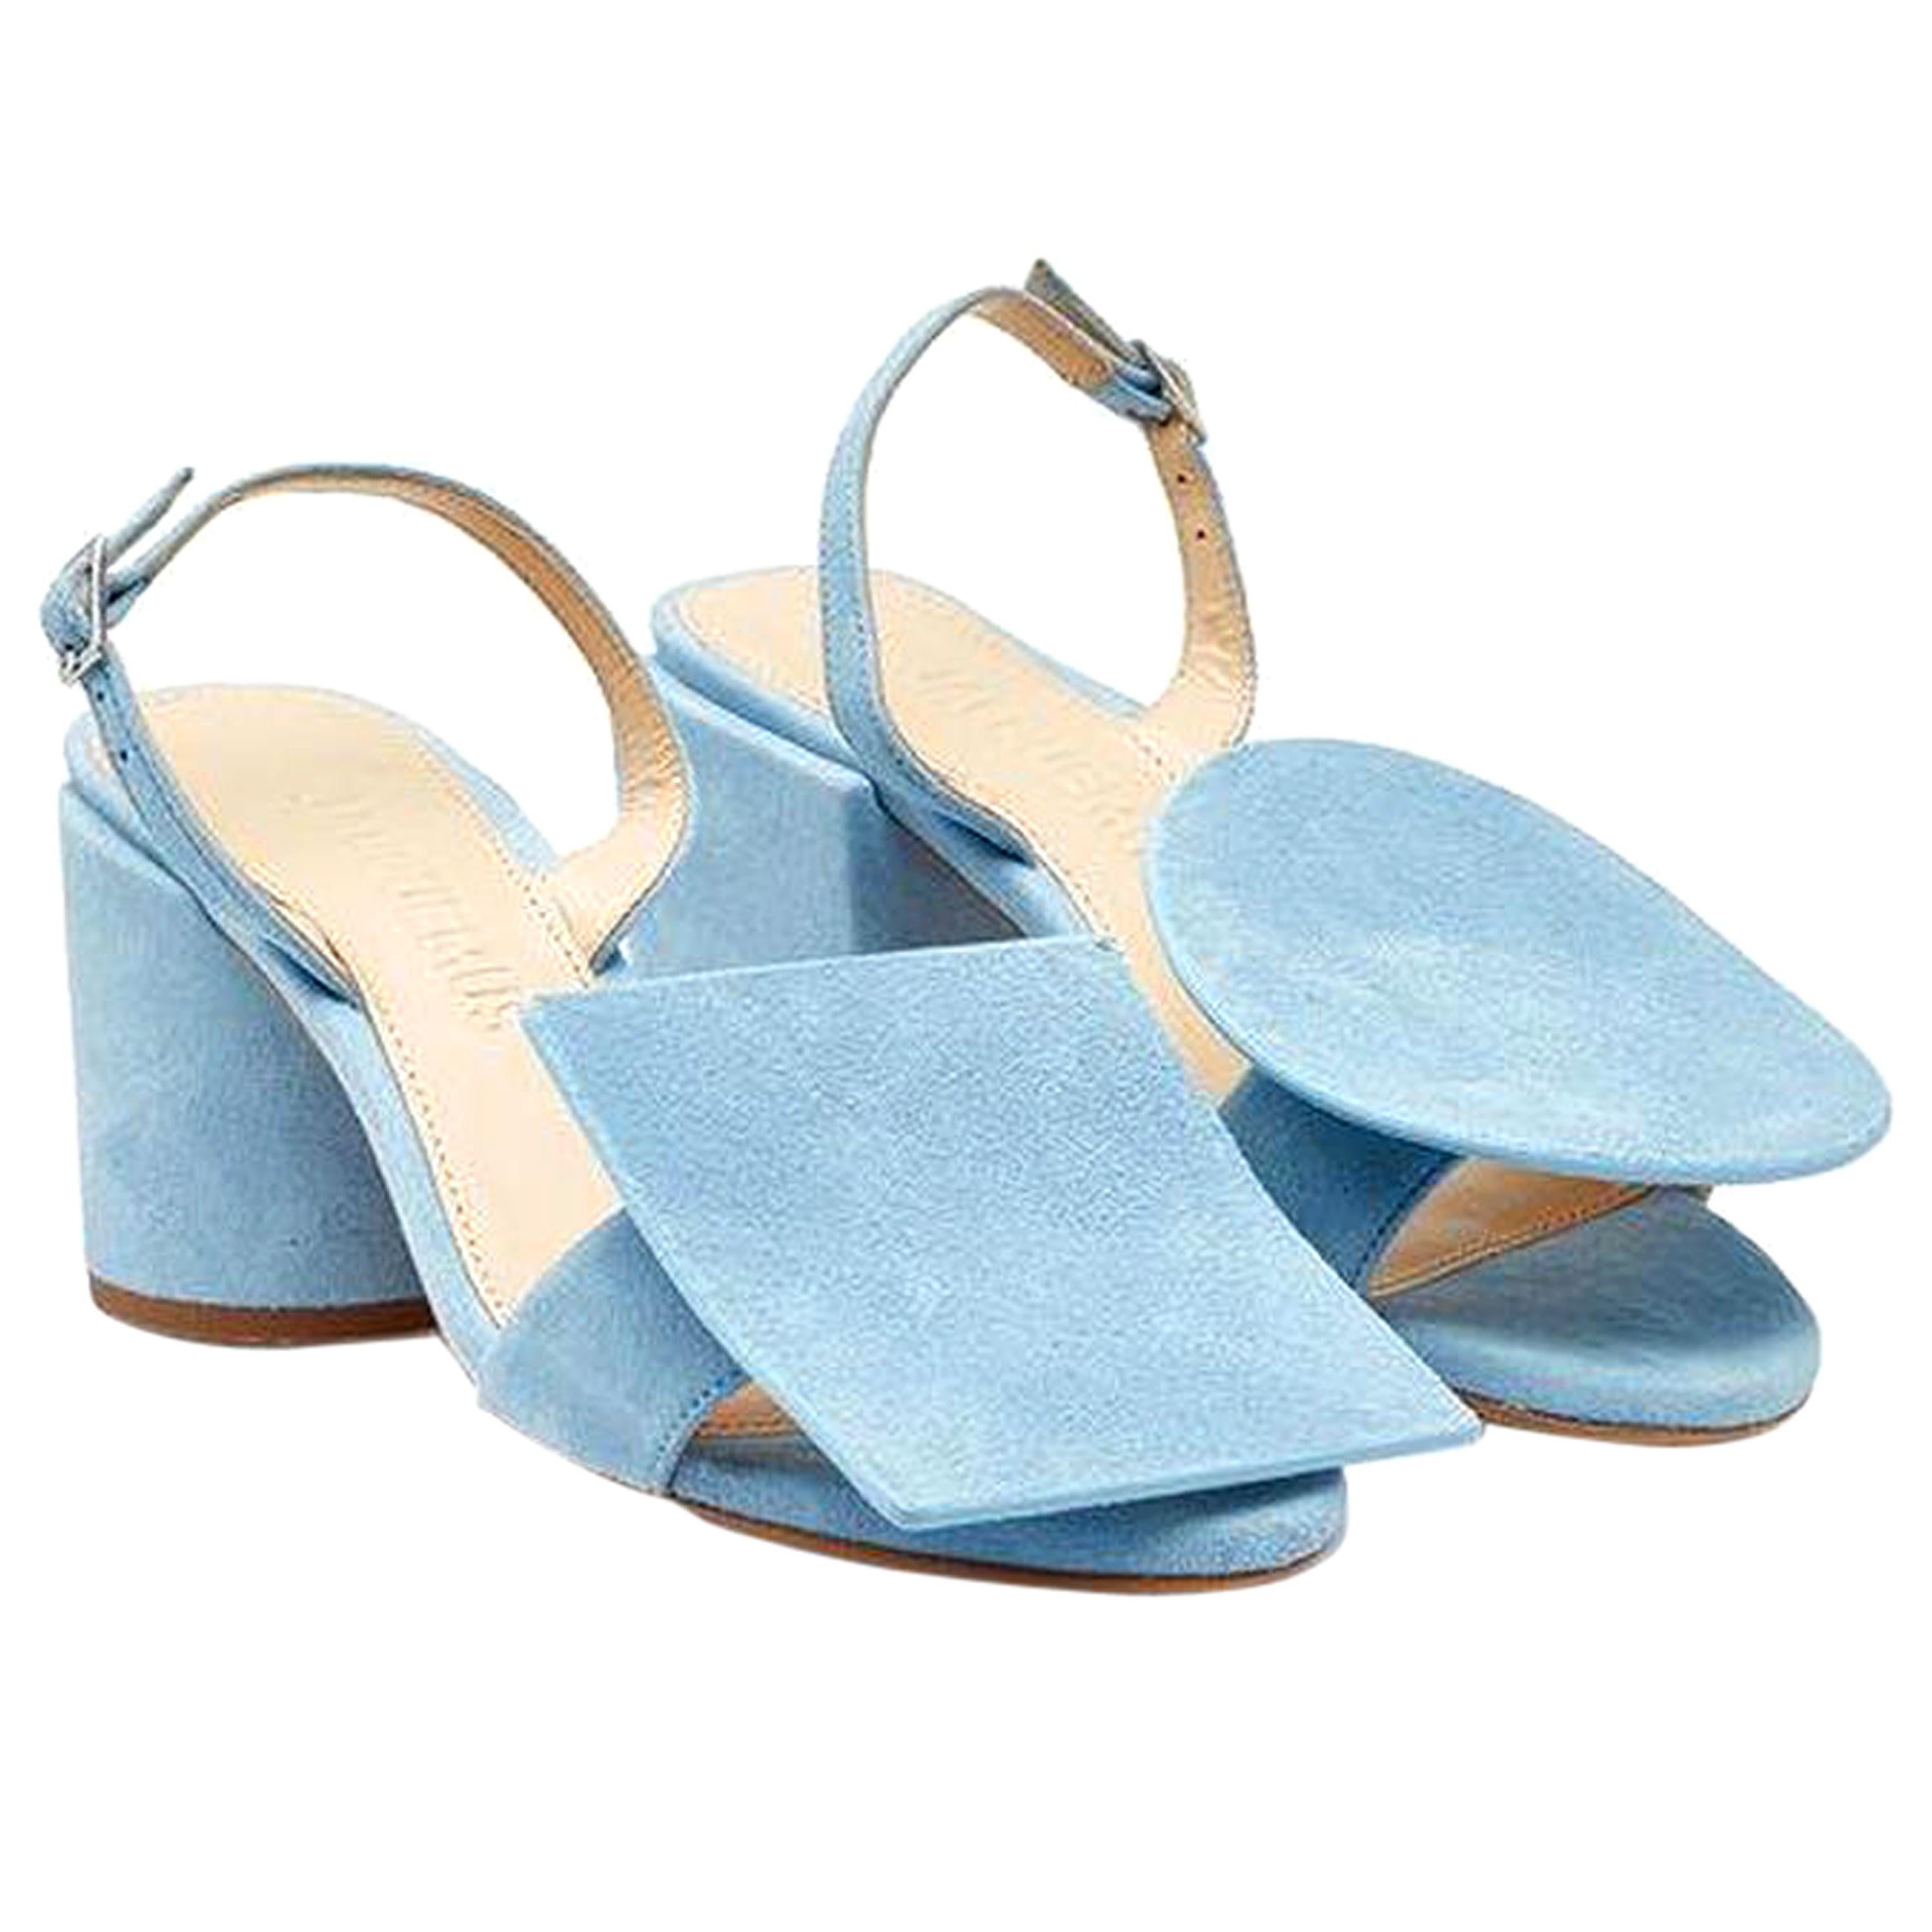 NEW in box Jacquemus 'Les Rond Carré' Sandals in Light Blue Suede EU37 For Sale